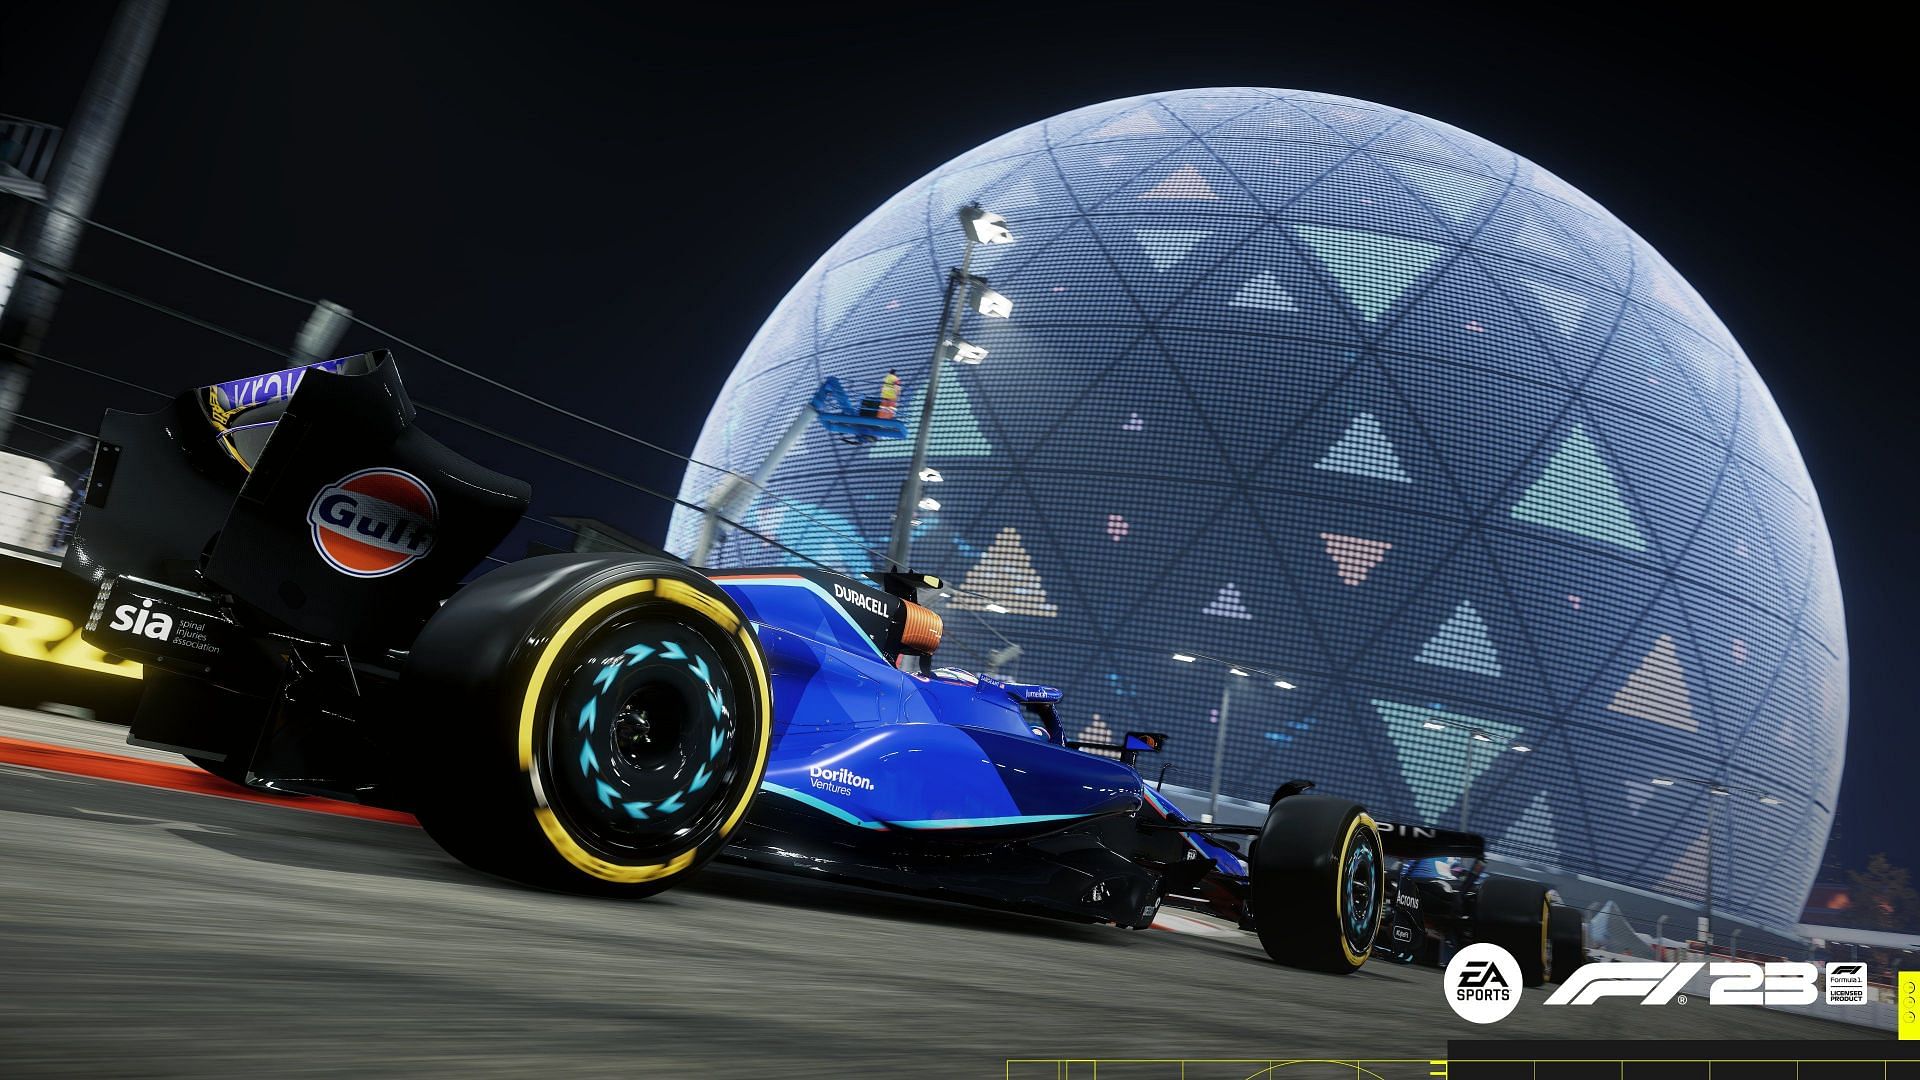 F1 2023 coming in June and will bring back story mode